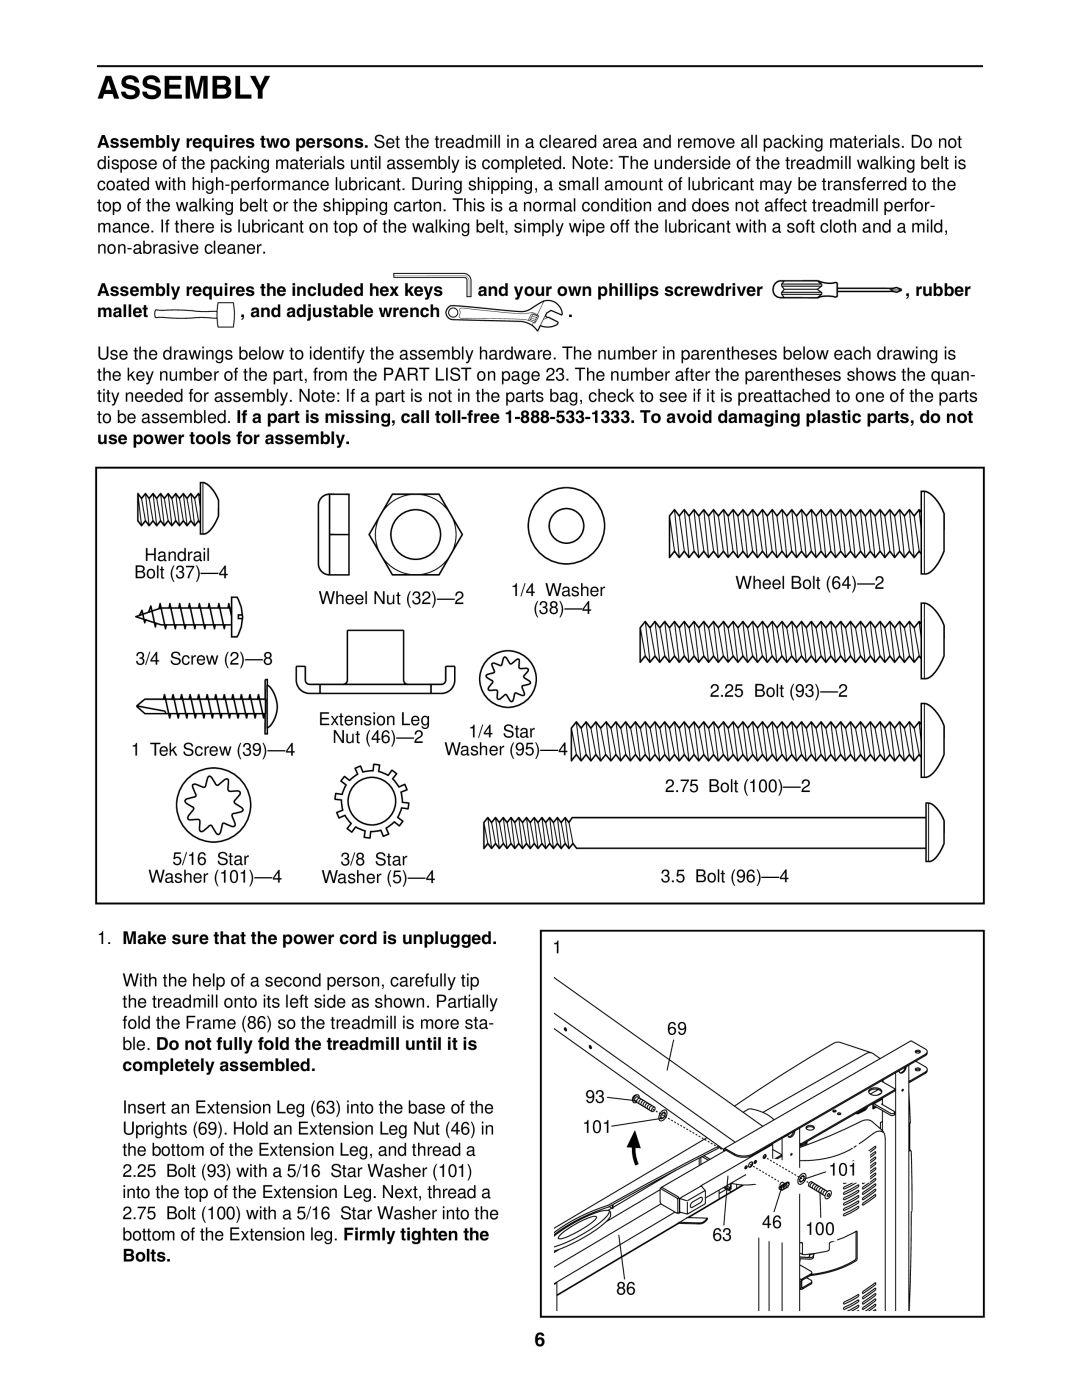 ProForm 831.24623.0 user manual Assembly, Make sure that the power cord is unplugged, Bolts 